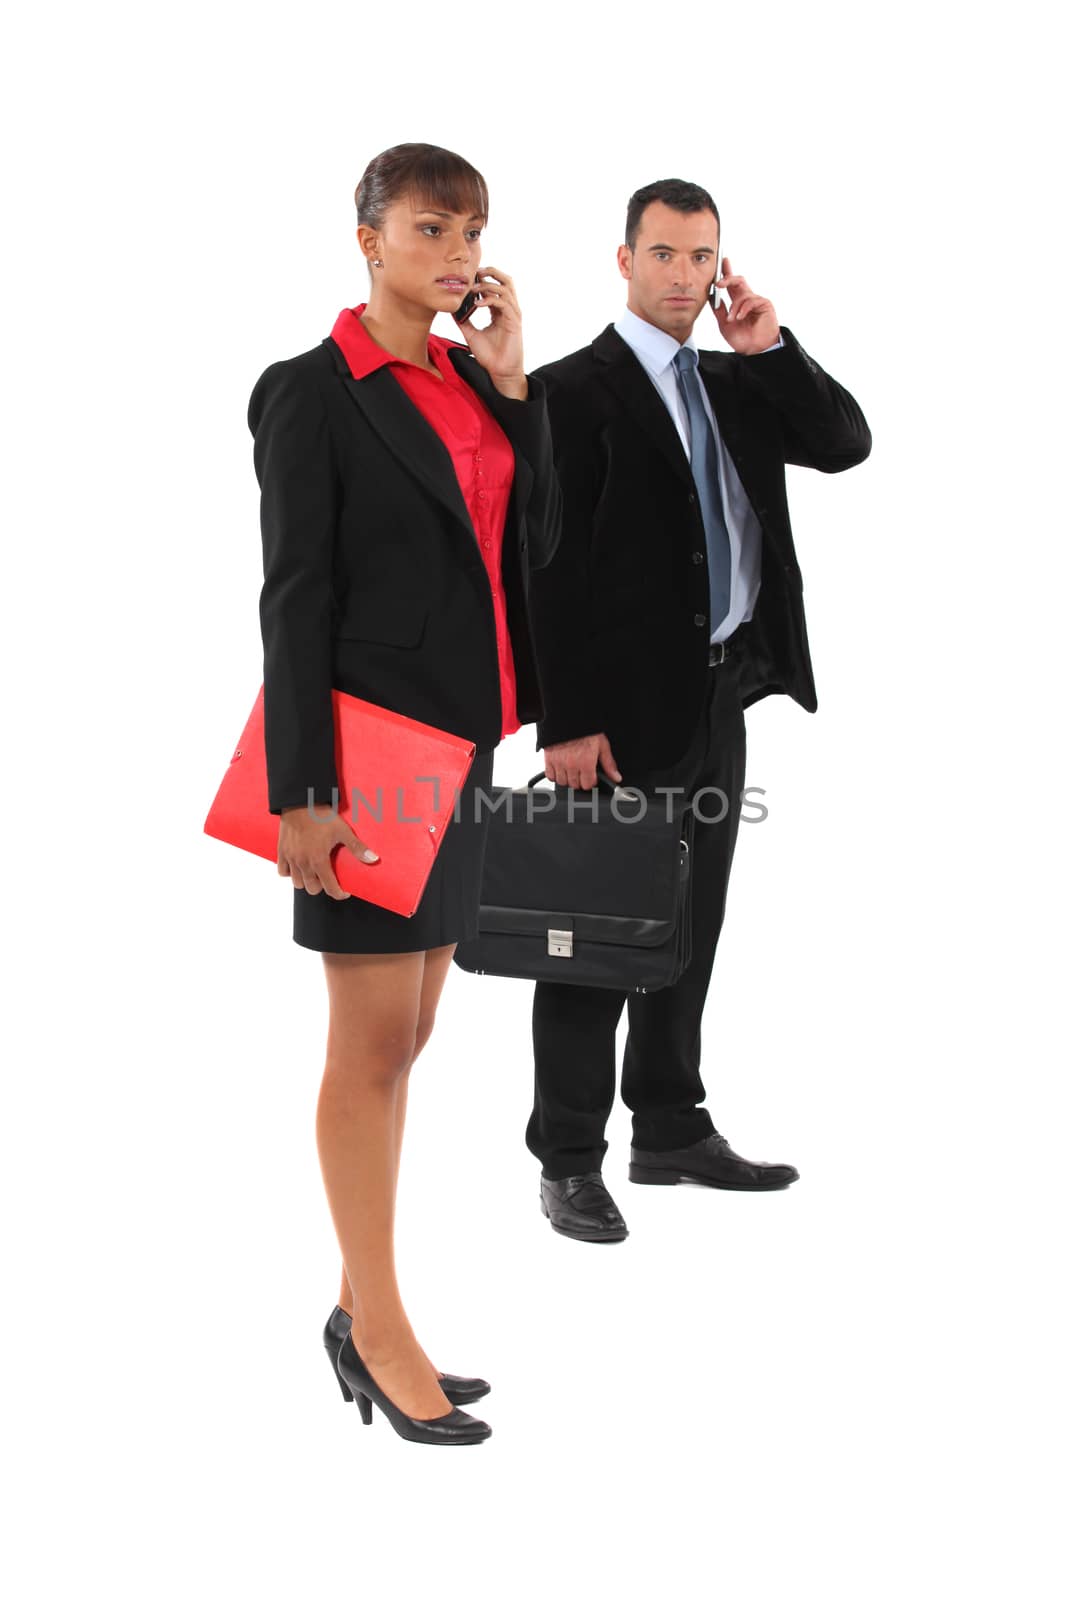 Couple of executives at the phone by phovoir